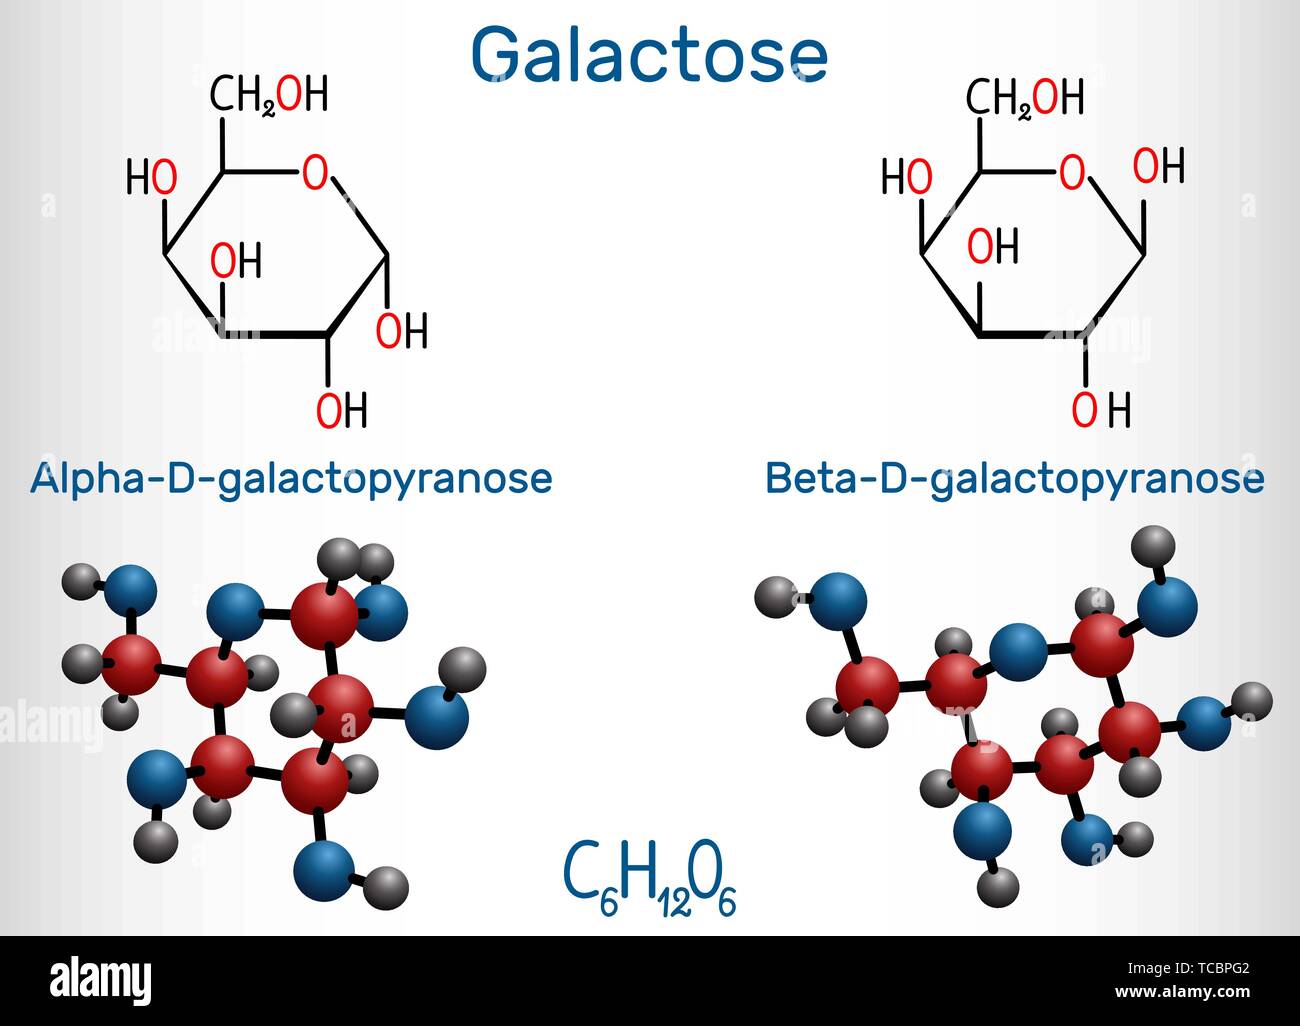 Structure of Glucose, Fructose and Galactose